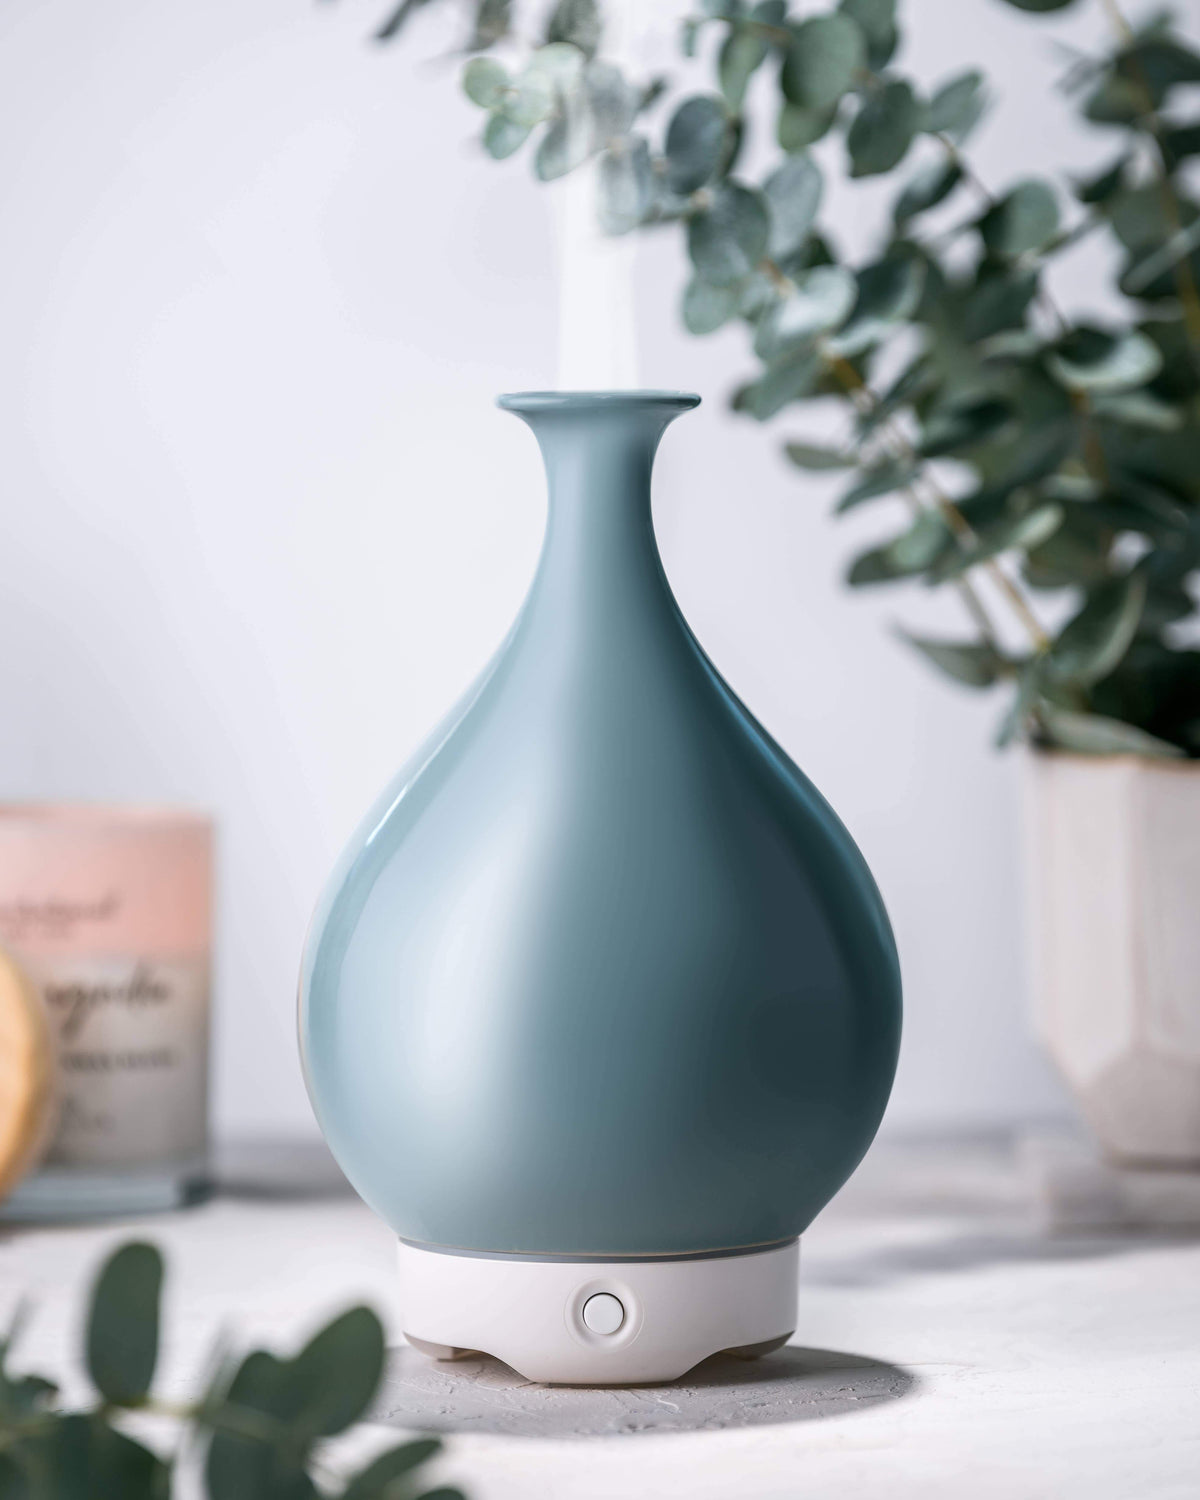 A sleek, soft blue Woolzies Green Glass Vase Diffuser with ultrasonic technology and a teardrop design, positioned on a light tabletop surrounded by eucalyptus leaves with a hint of blurred greenery.